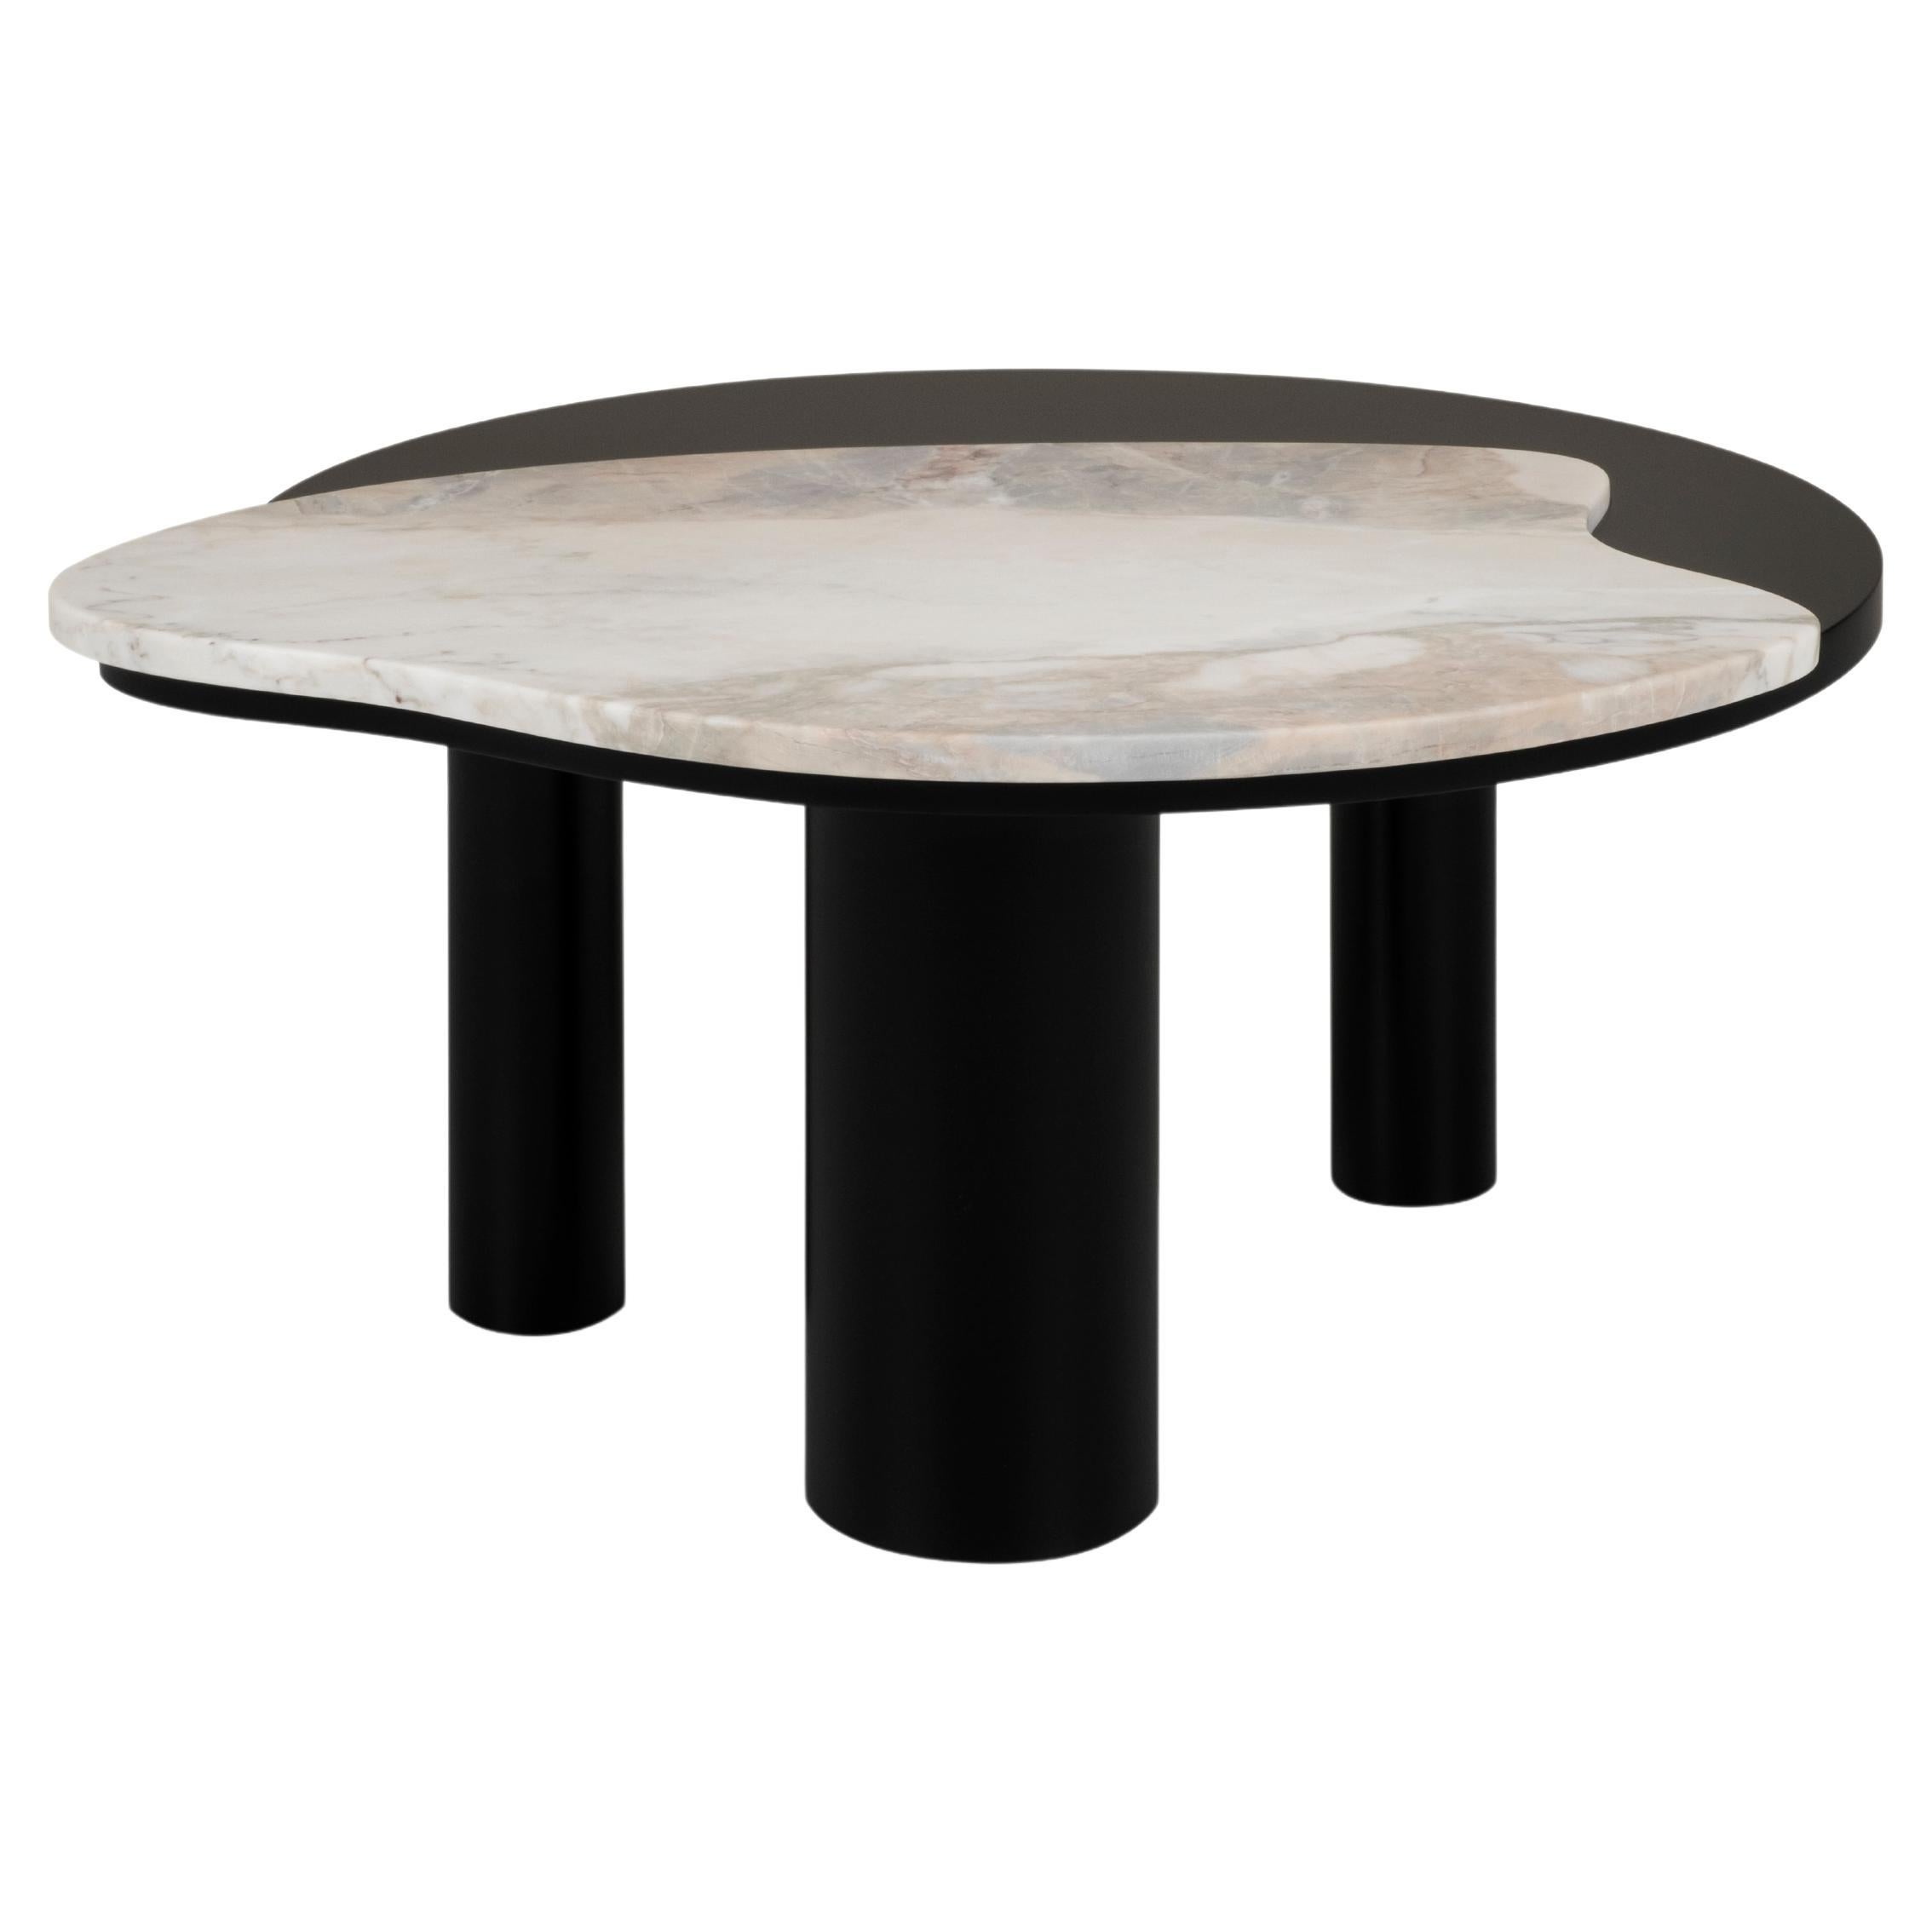 Modern Bordeira Coffee Table Calacatta Cremo Marble Handcrafted by Greenapple